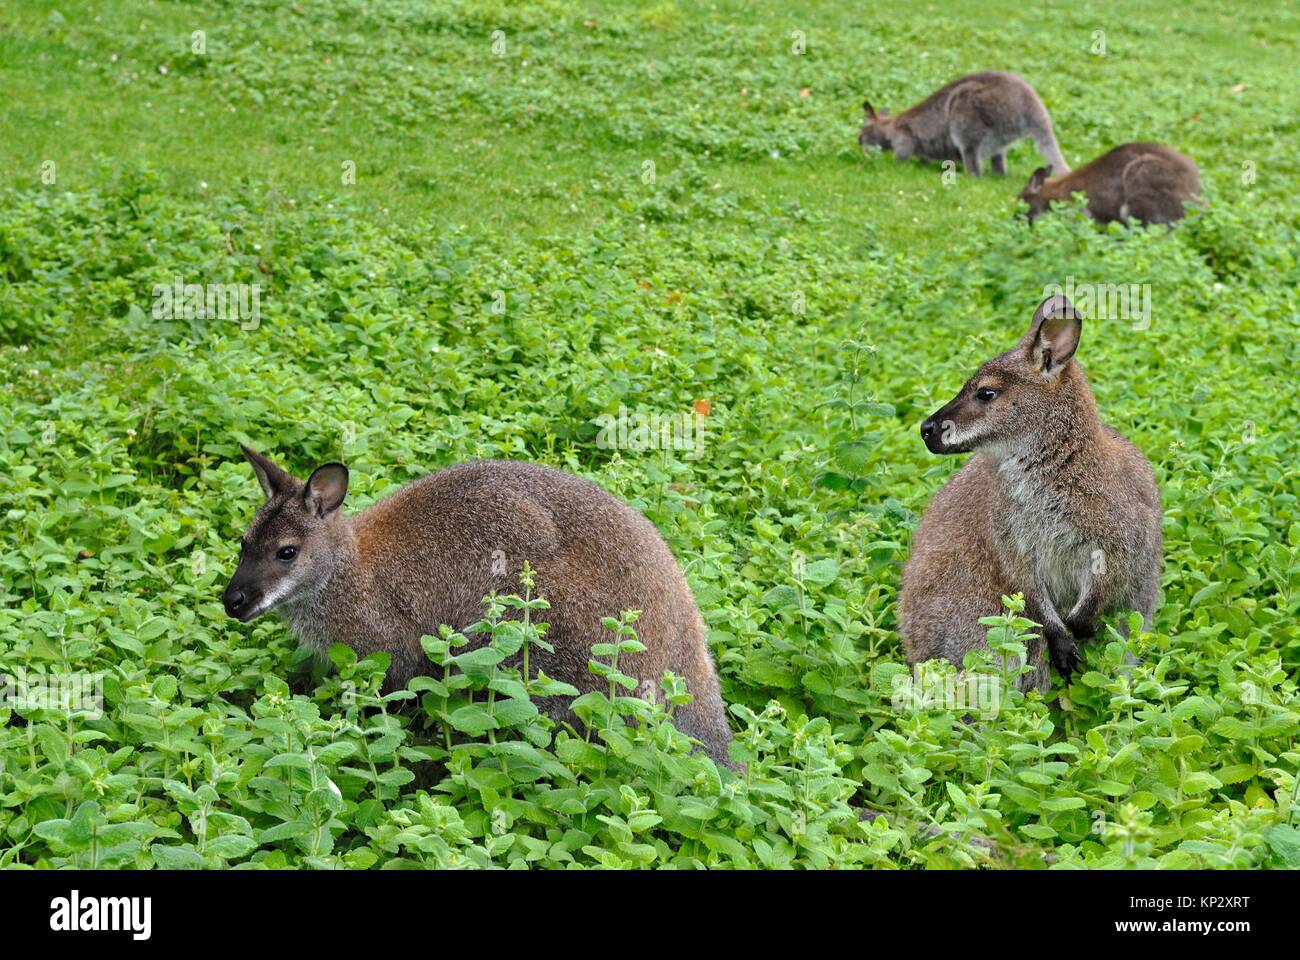 Red-necked wallaby (Macropus rufogriseus) in the Park of the Chateau de Sauvage, Emance, Yvelines department, Ile-de-France region, France, Europe. Stock Photo